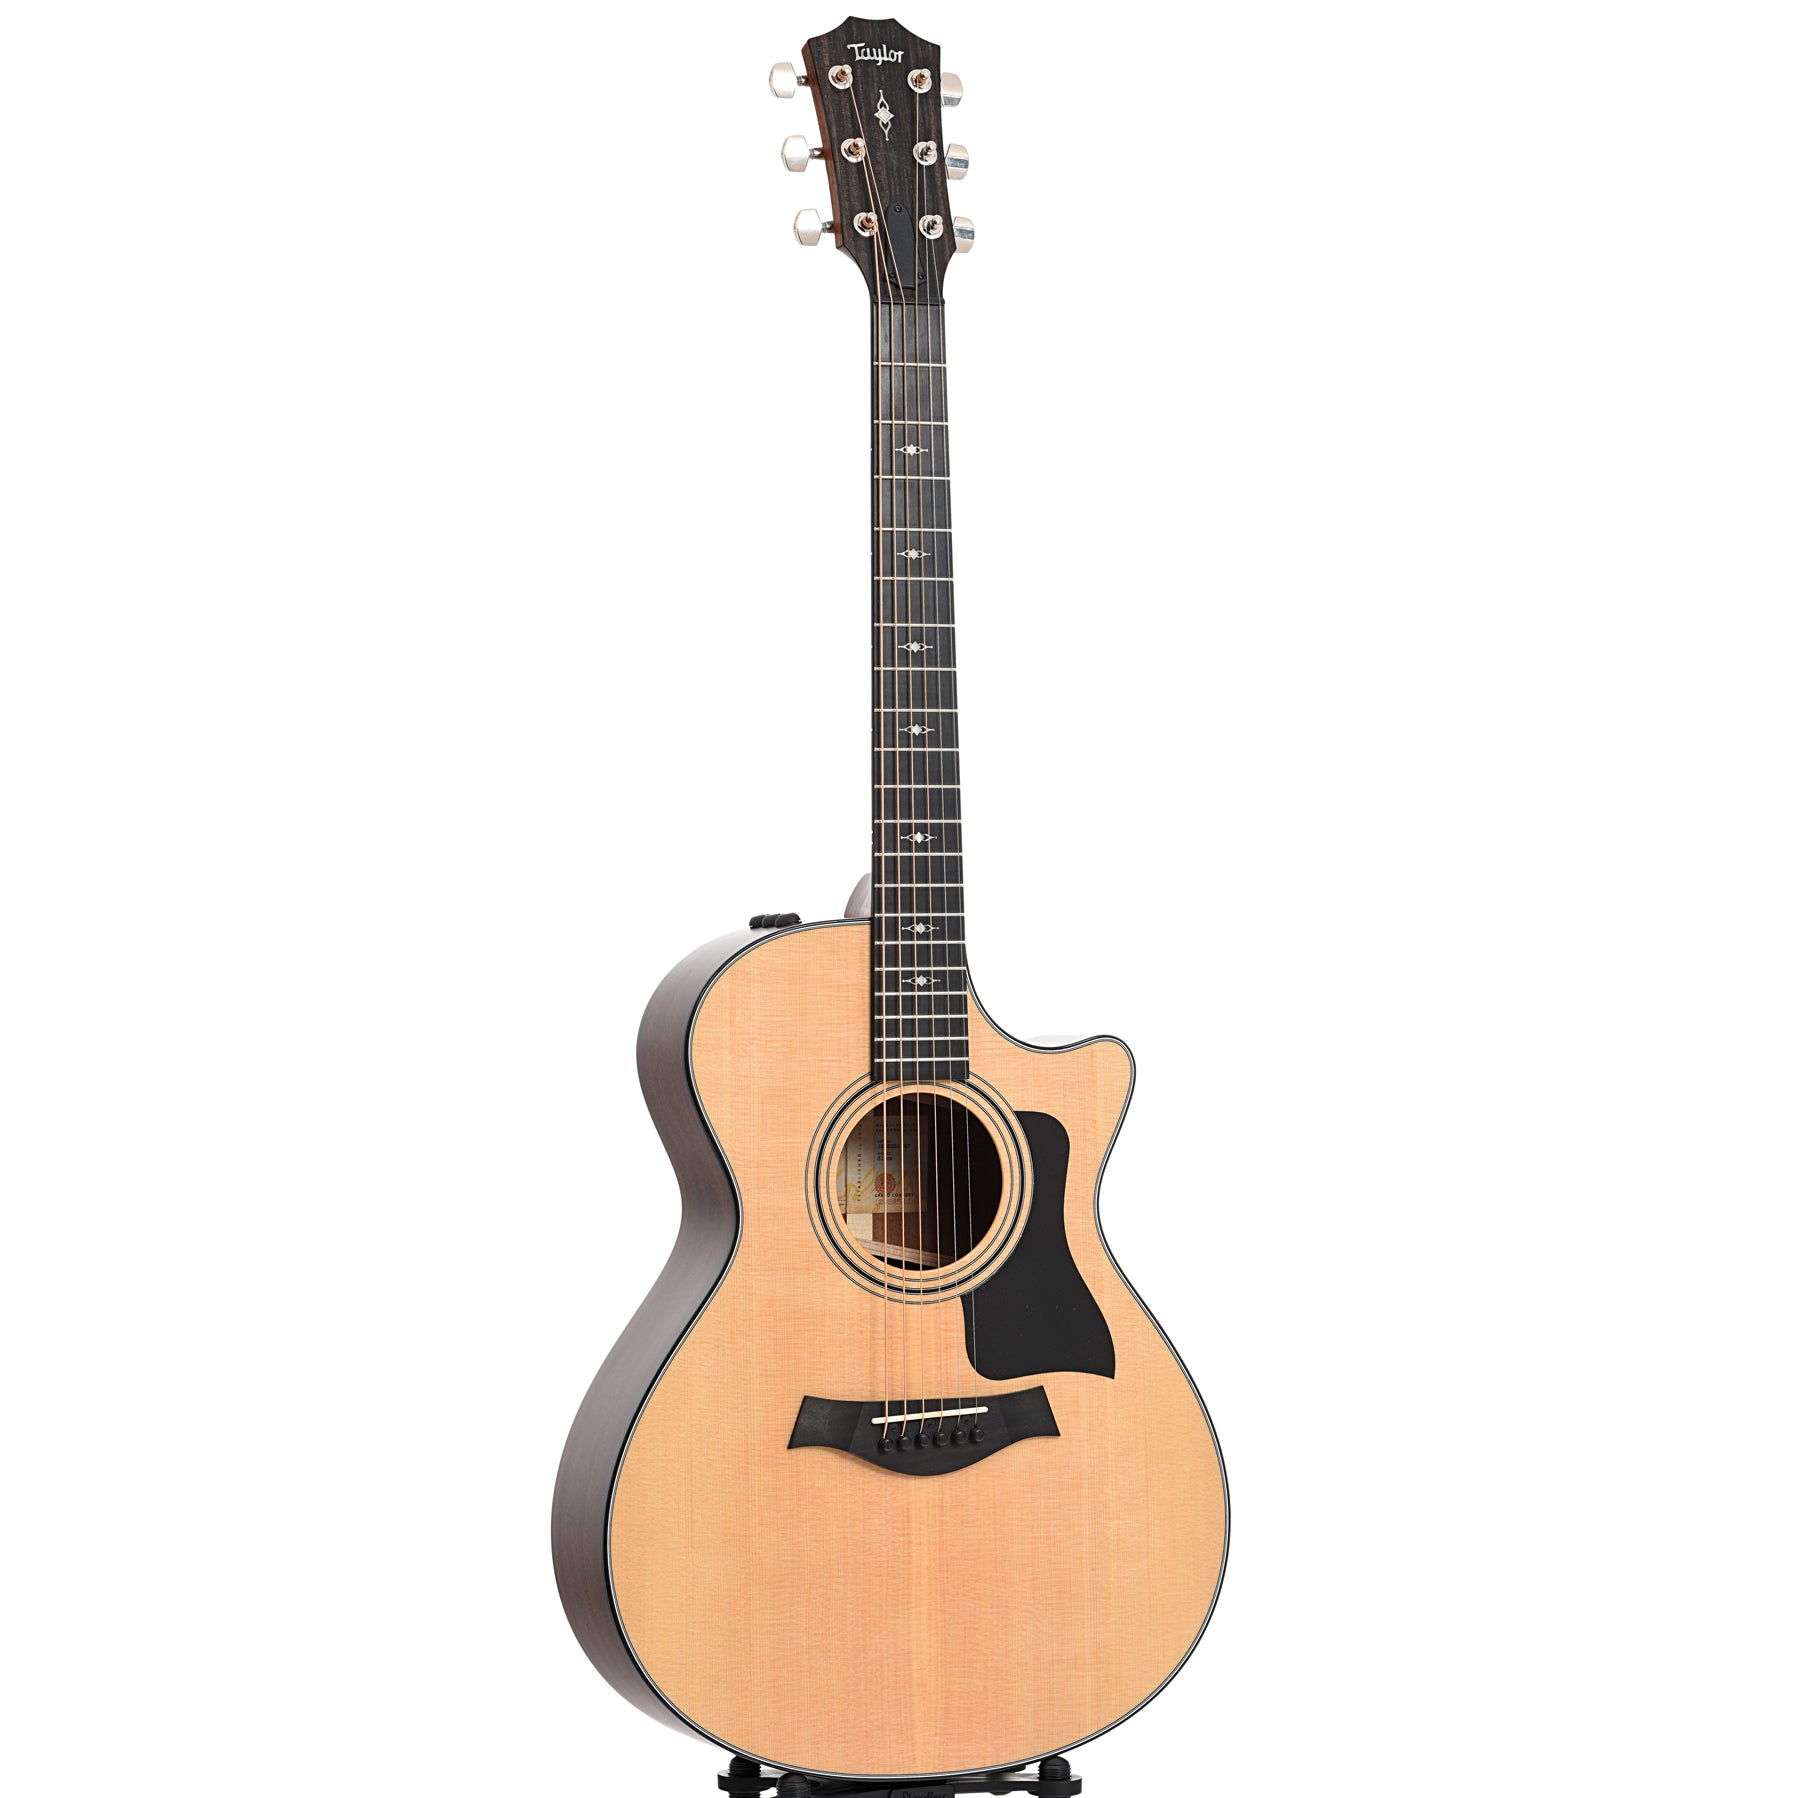 Full front and side of Taylor 312-ce V-Class Acoustic-Electric Guitar